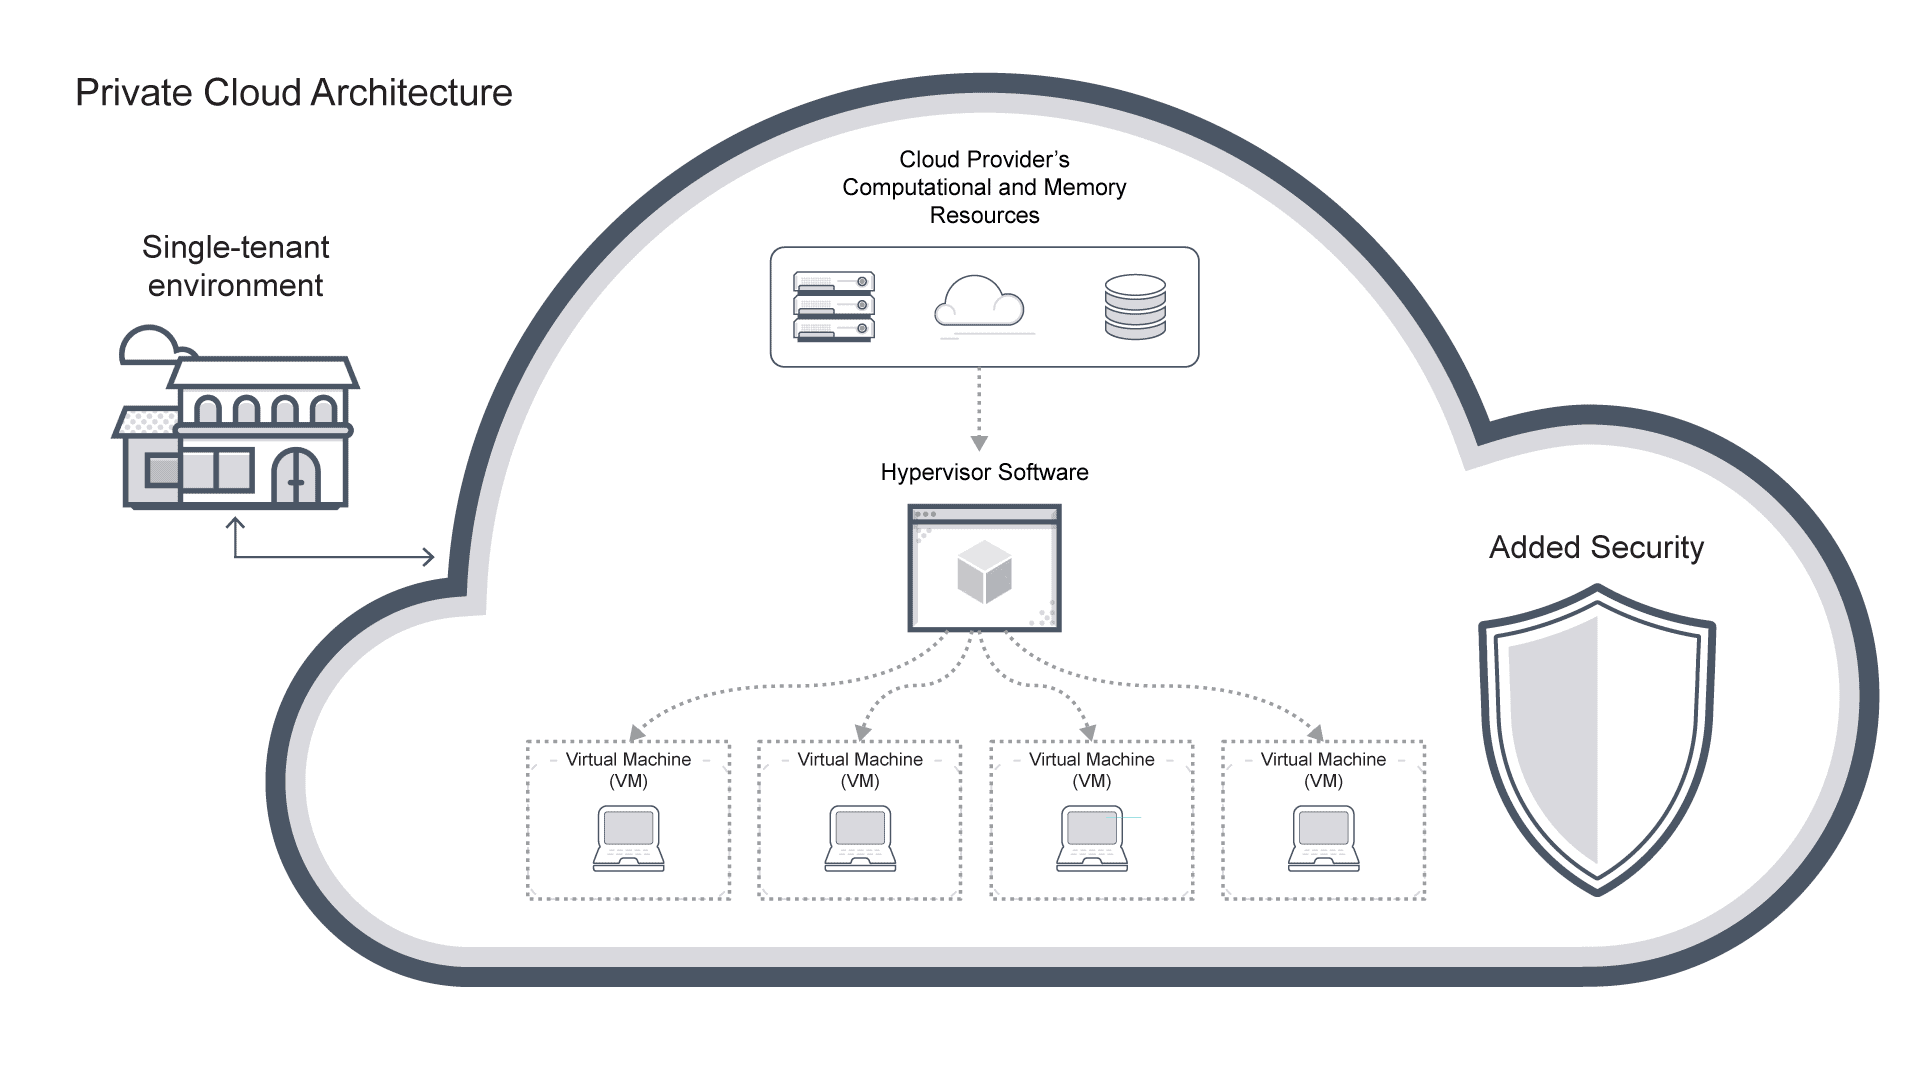 Image portraying private cloud architecture, diagramming how a cloud providers computational and memory resources work with hypervisor and virtual machines.